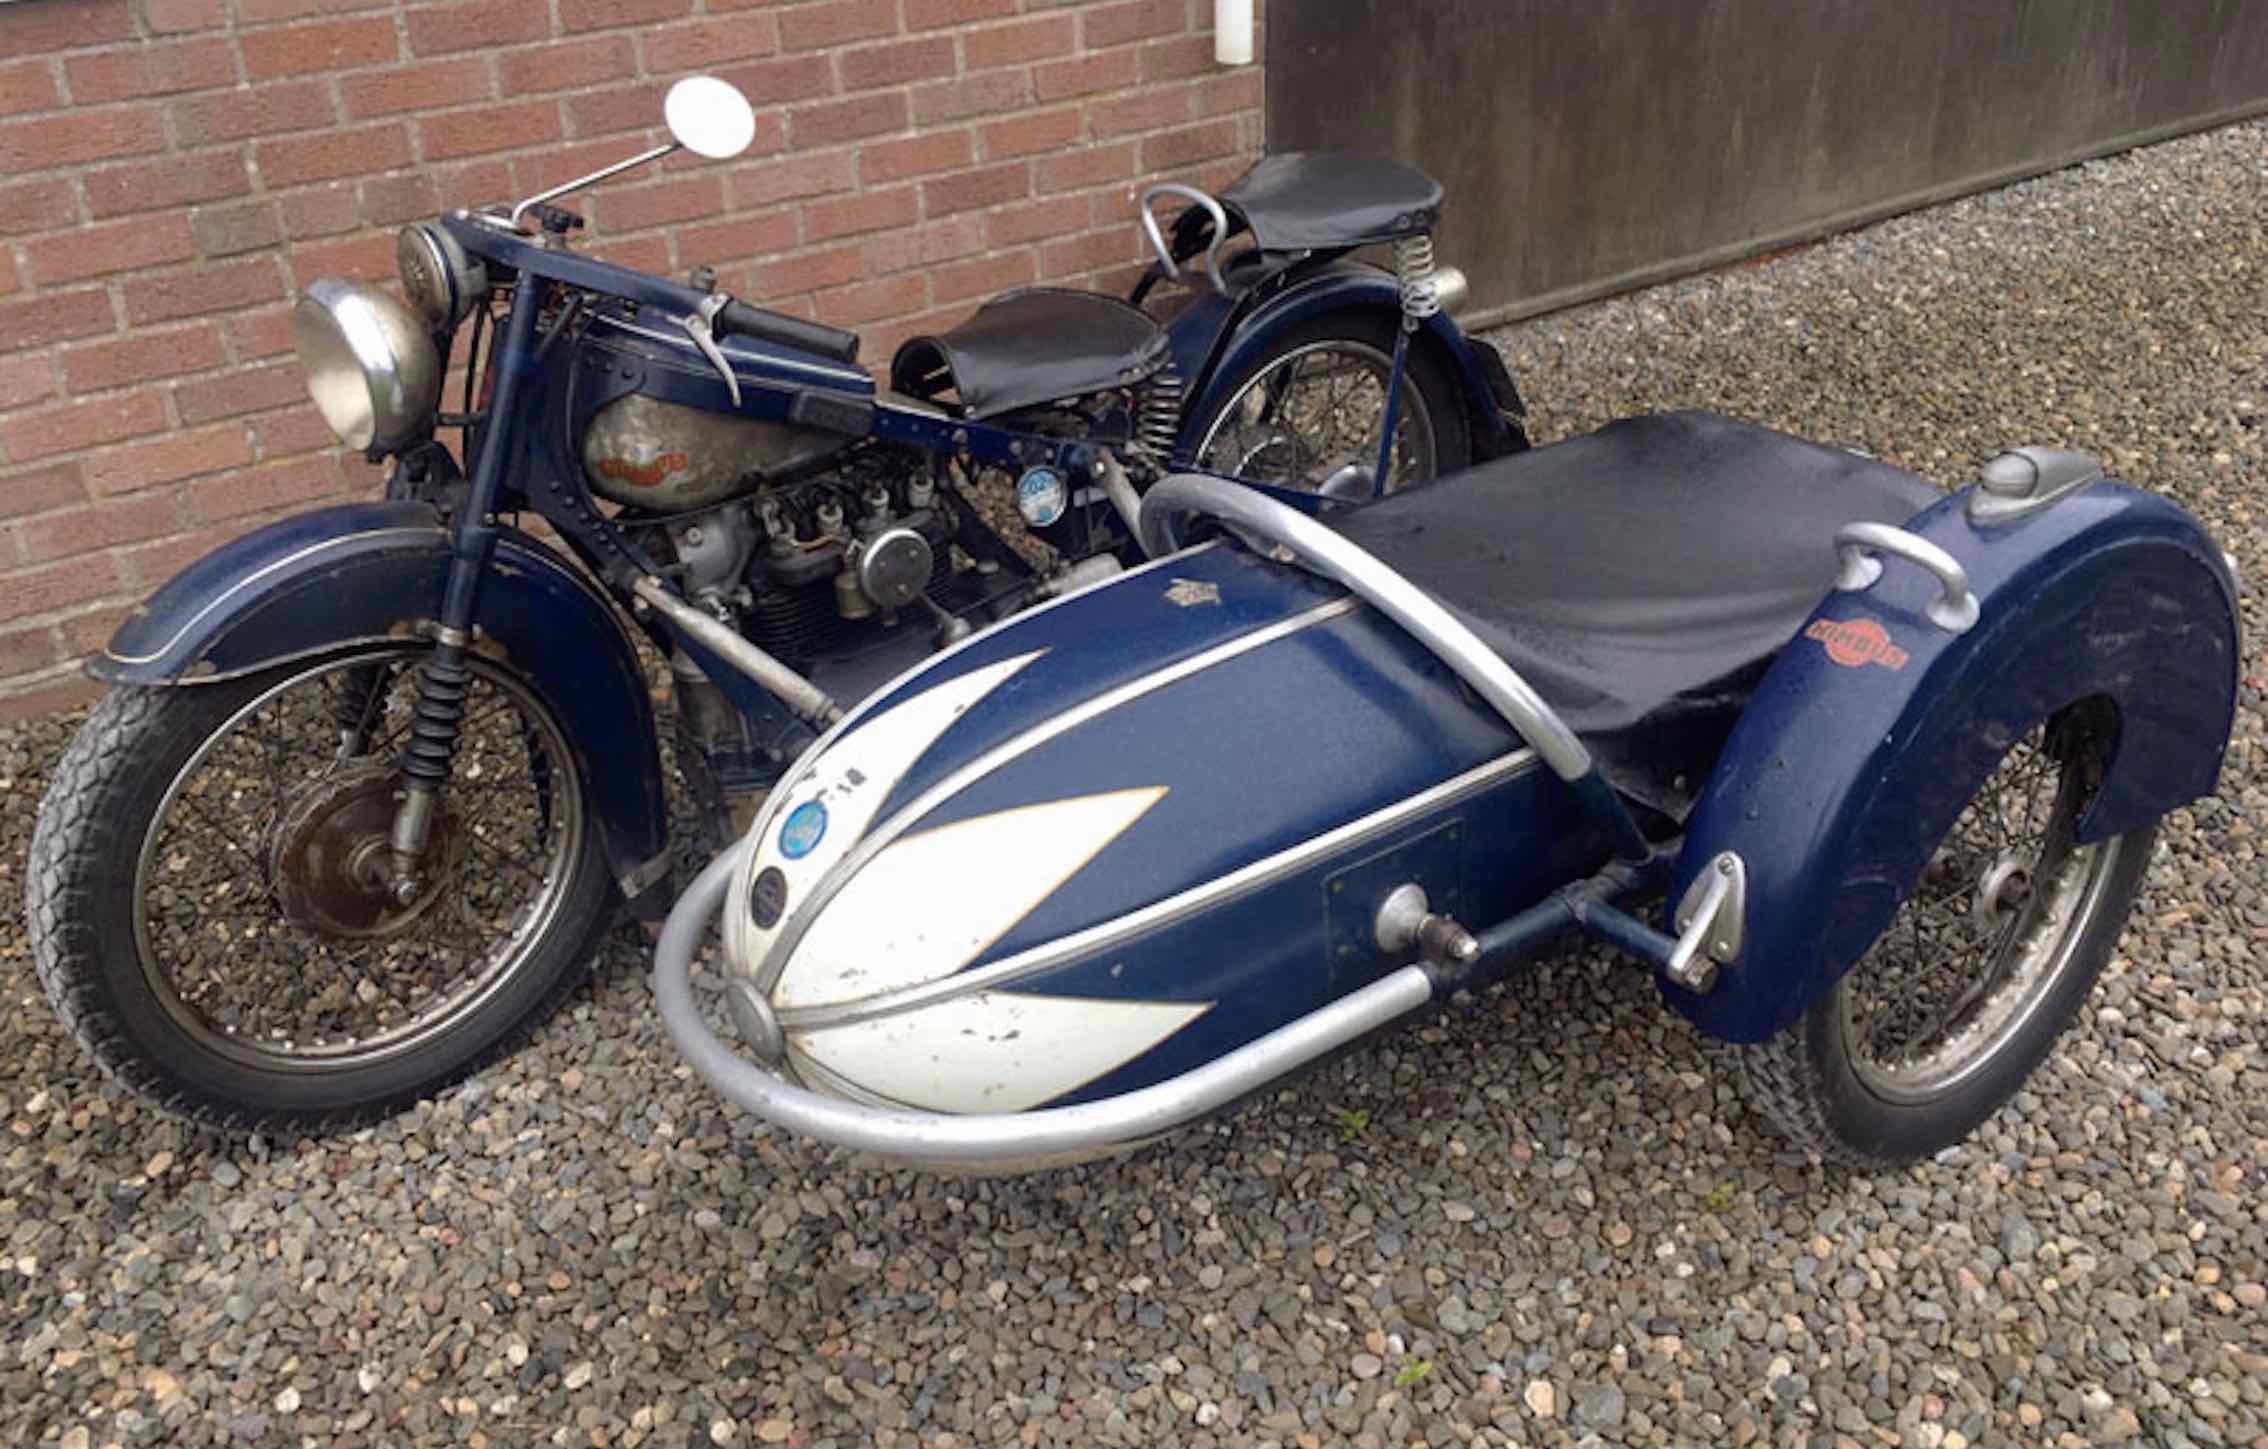 48+ Awesome Motorcycles with sidecars image HD